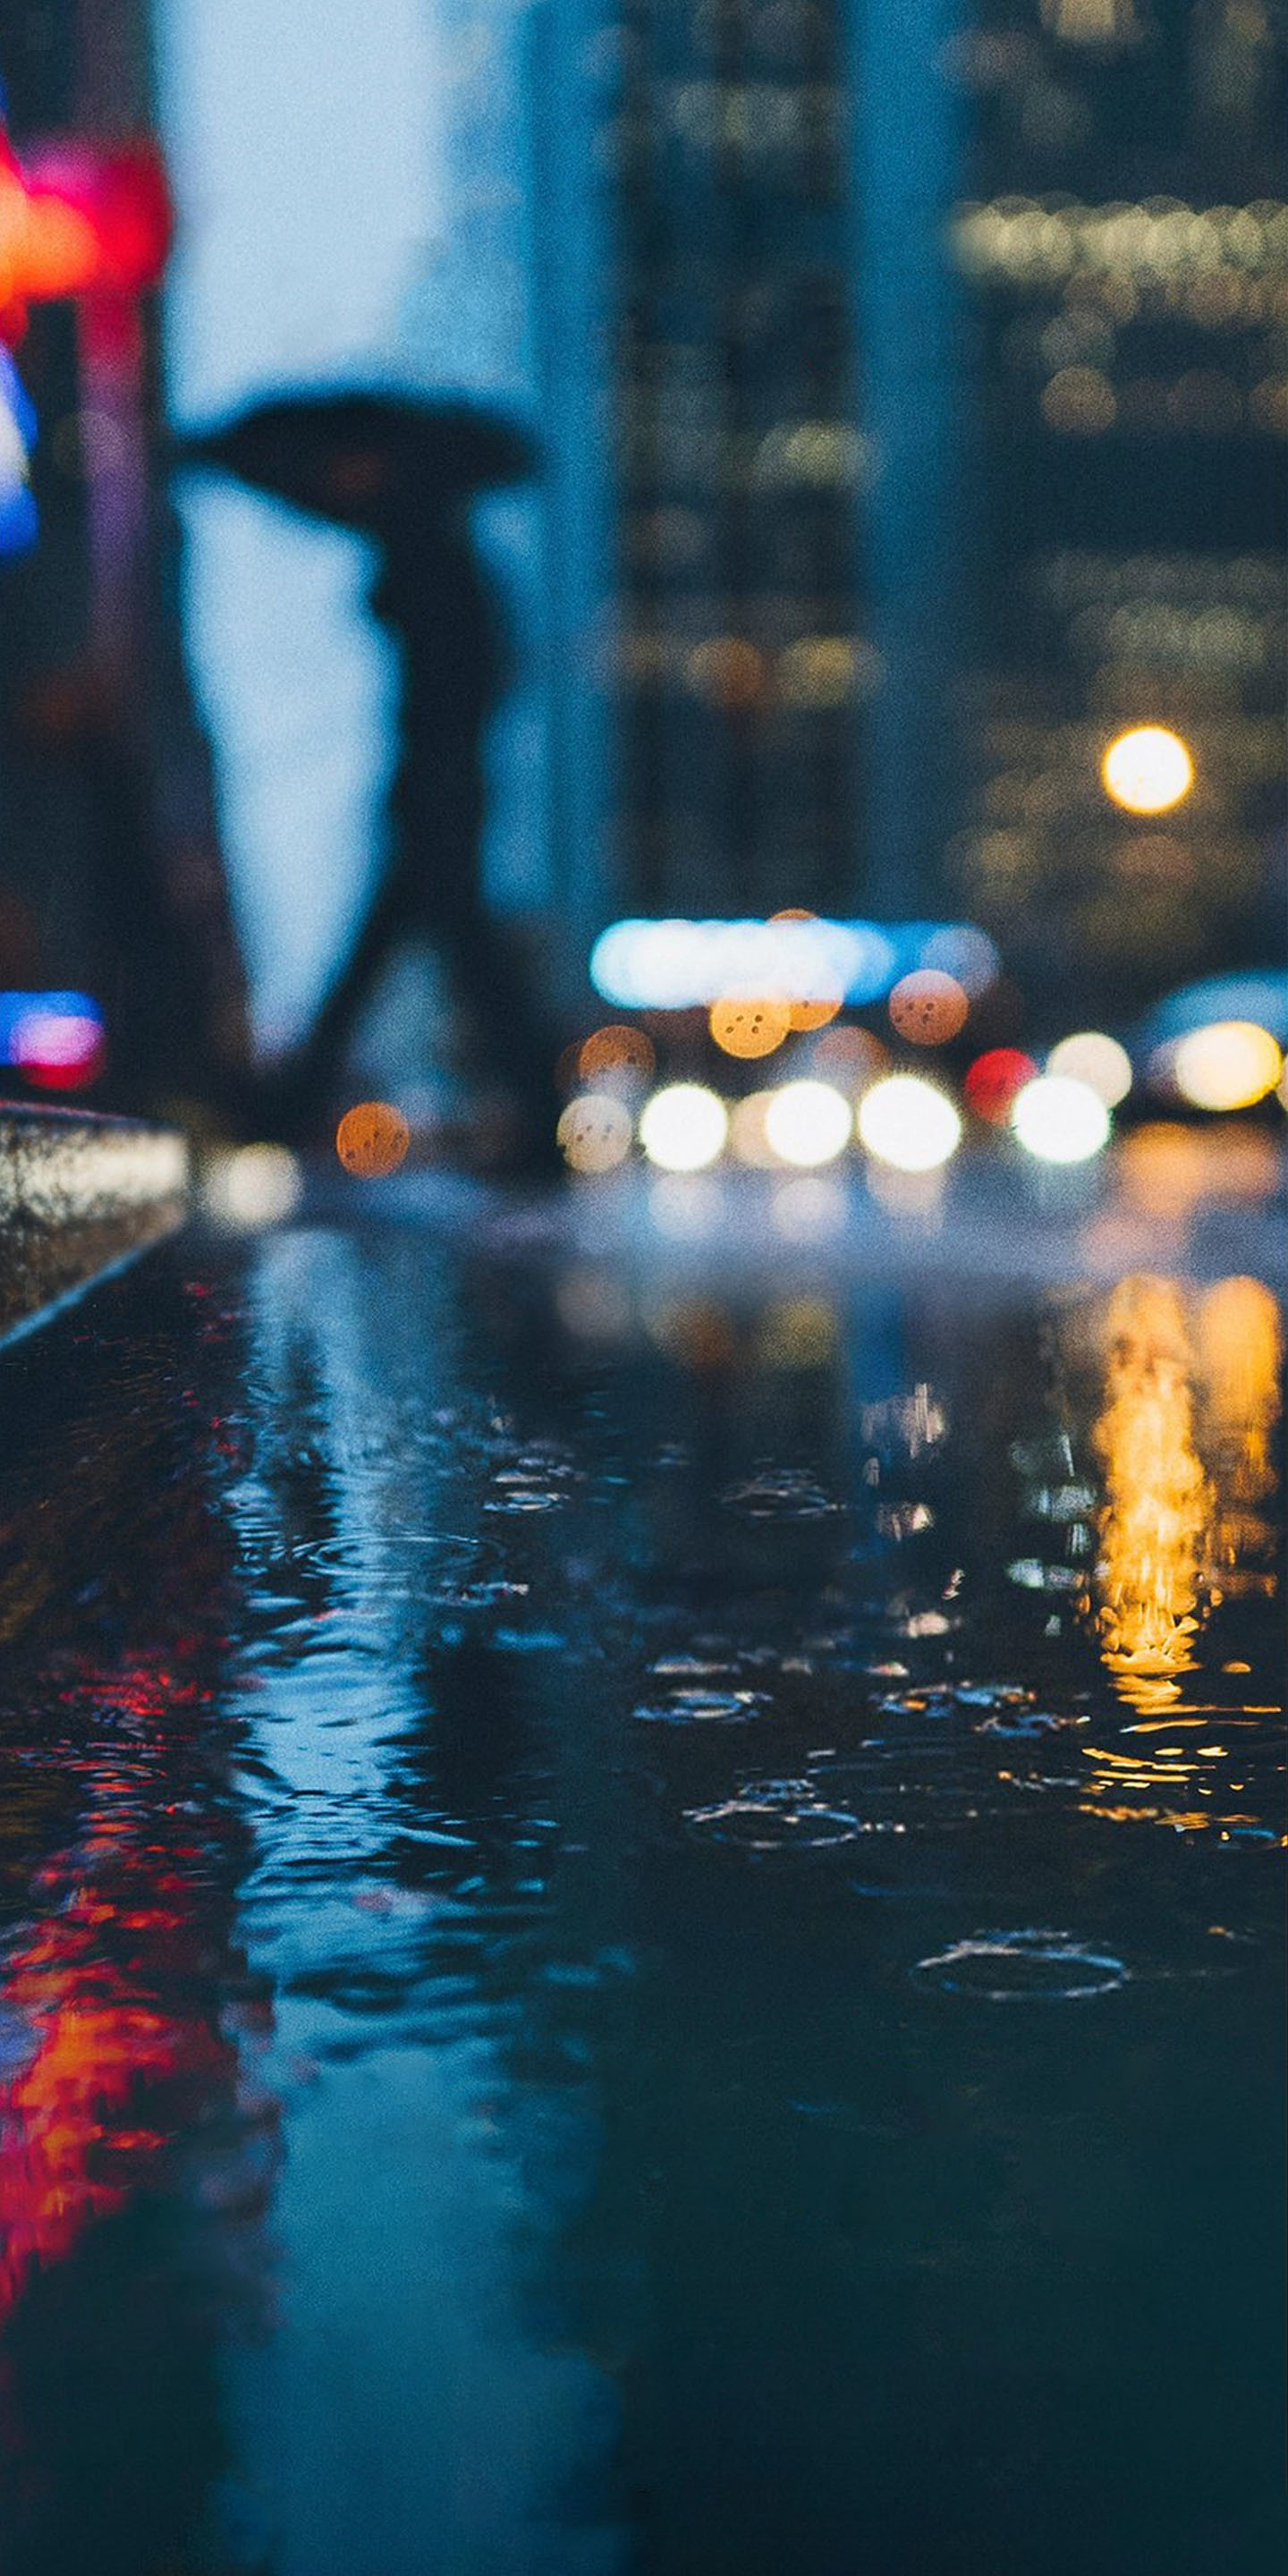 Top 7 Android Rain Live Wallpaper Apps for Rain Lovers